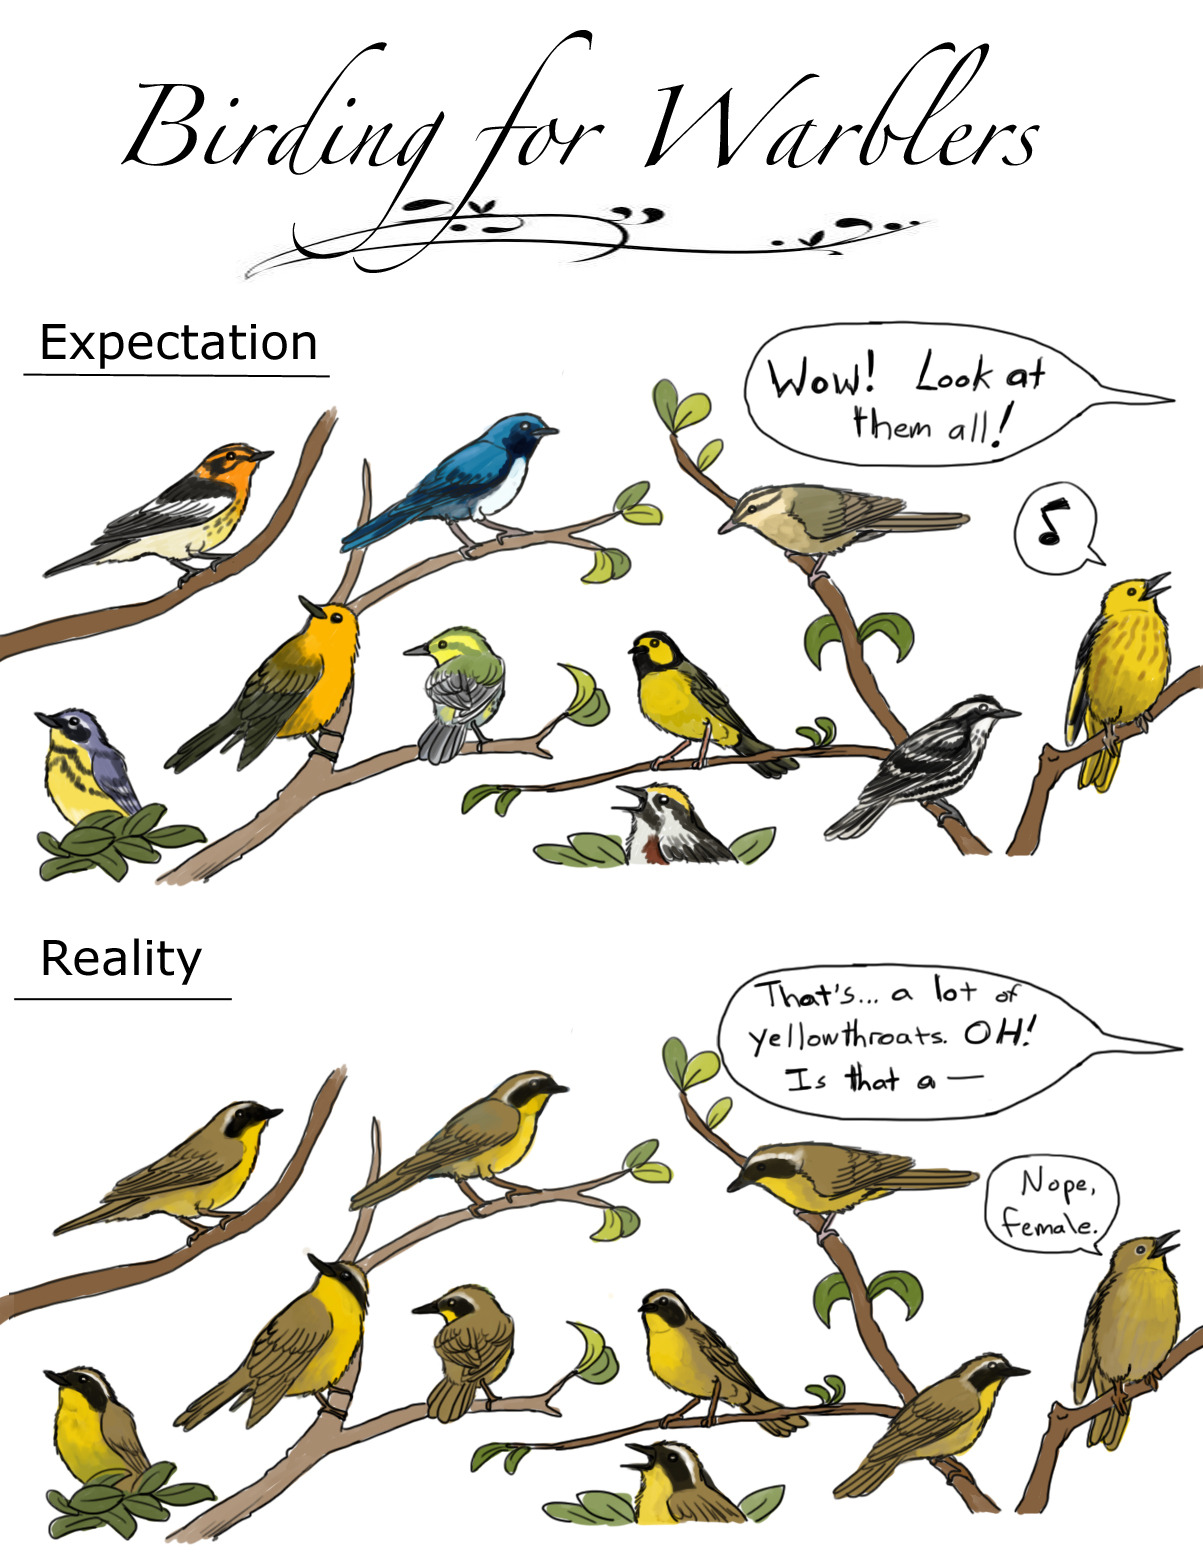 ewilloughby:
“You’d almost think they were common or something.
Oh lord help me, I’m drawing birding cartoons now.
”
I don’t always reblog posts on Lonely Birder, but when I do, I prefer Dendroica. HA.
No, seriously, this is me. To a tee.